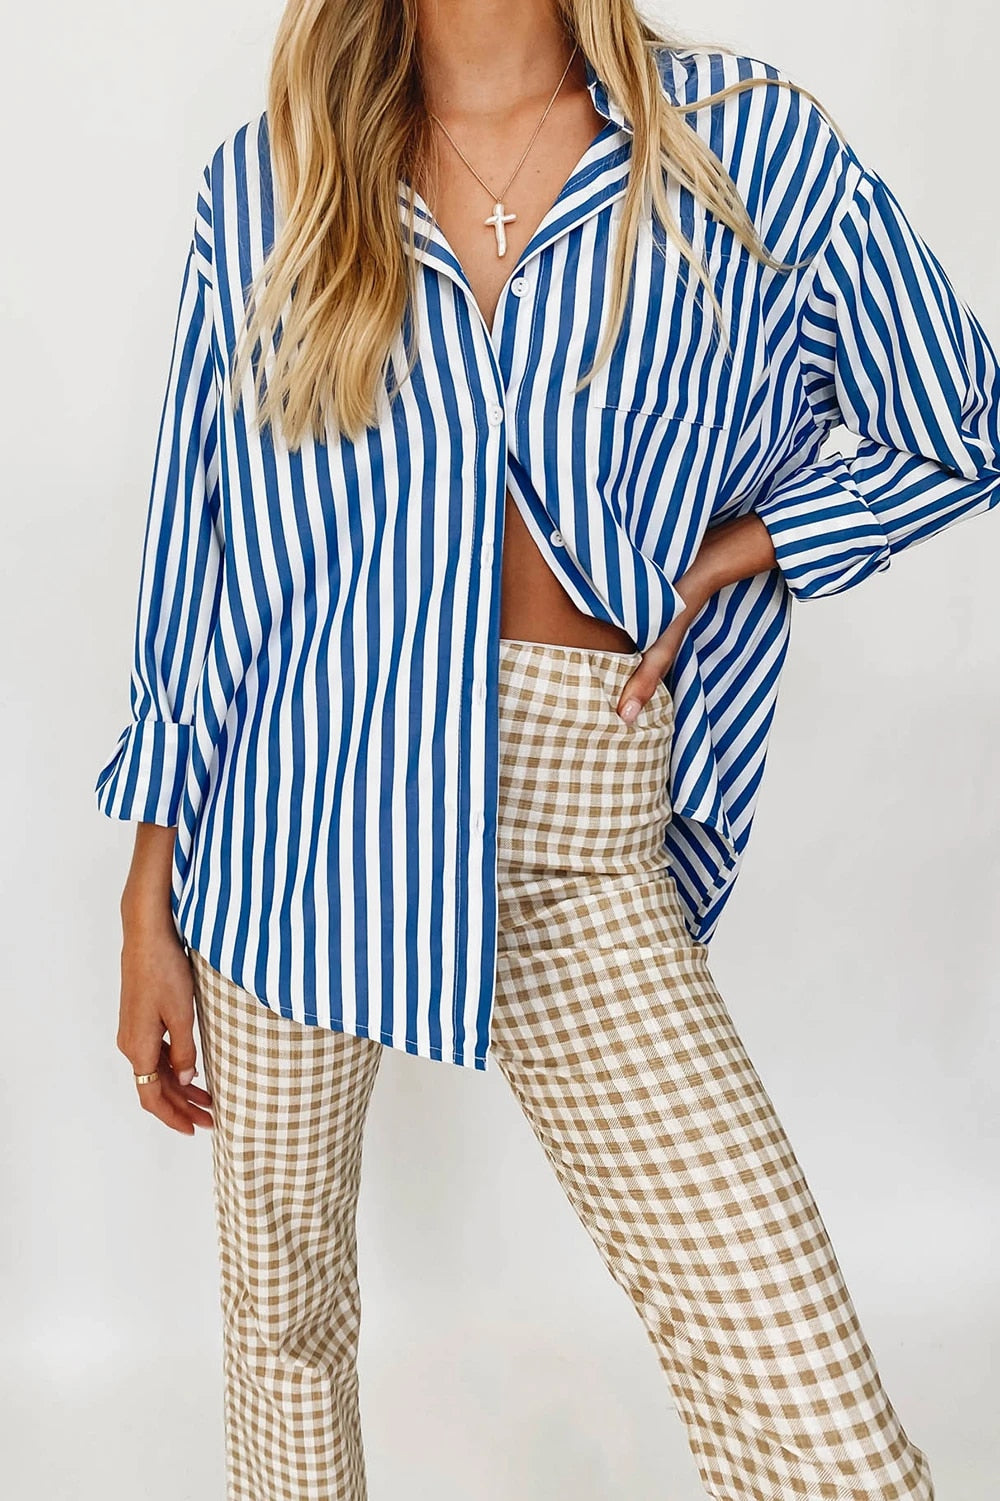 OOTDGIRL Stylish Women's Classic-Fit Long Sleeve Lightweight Button Down Shirt  Vertical Stripes Oversize BF Style Top Blouses